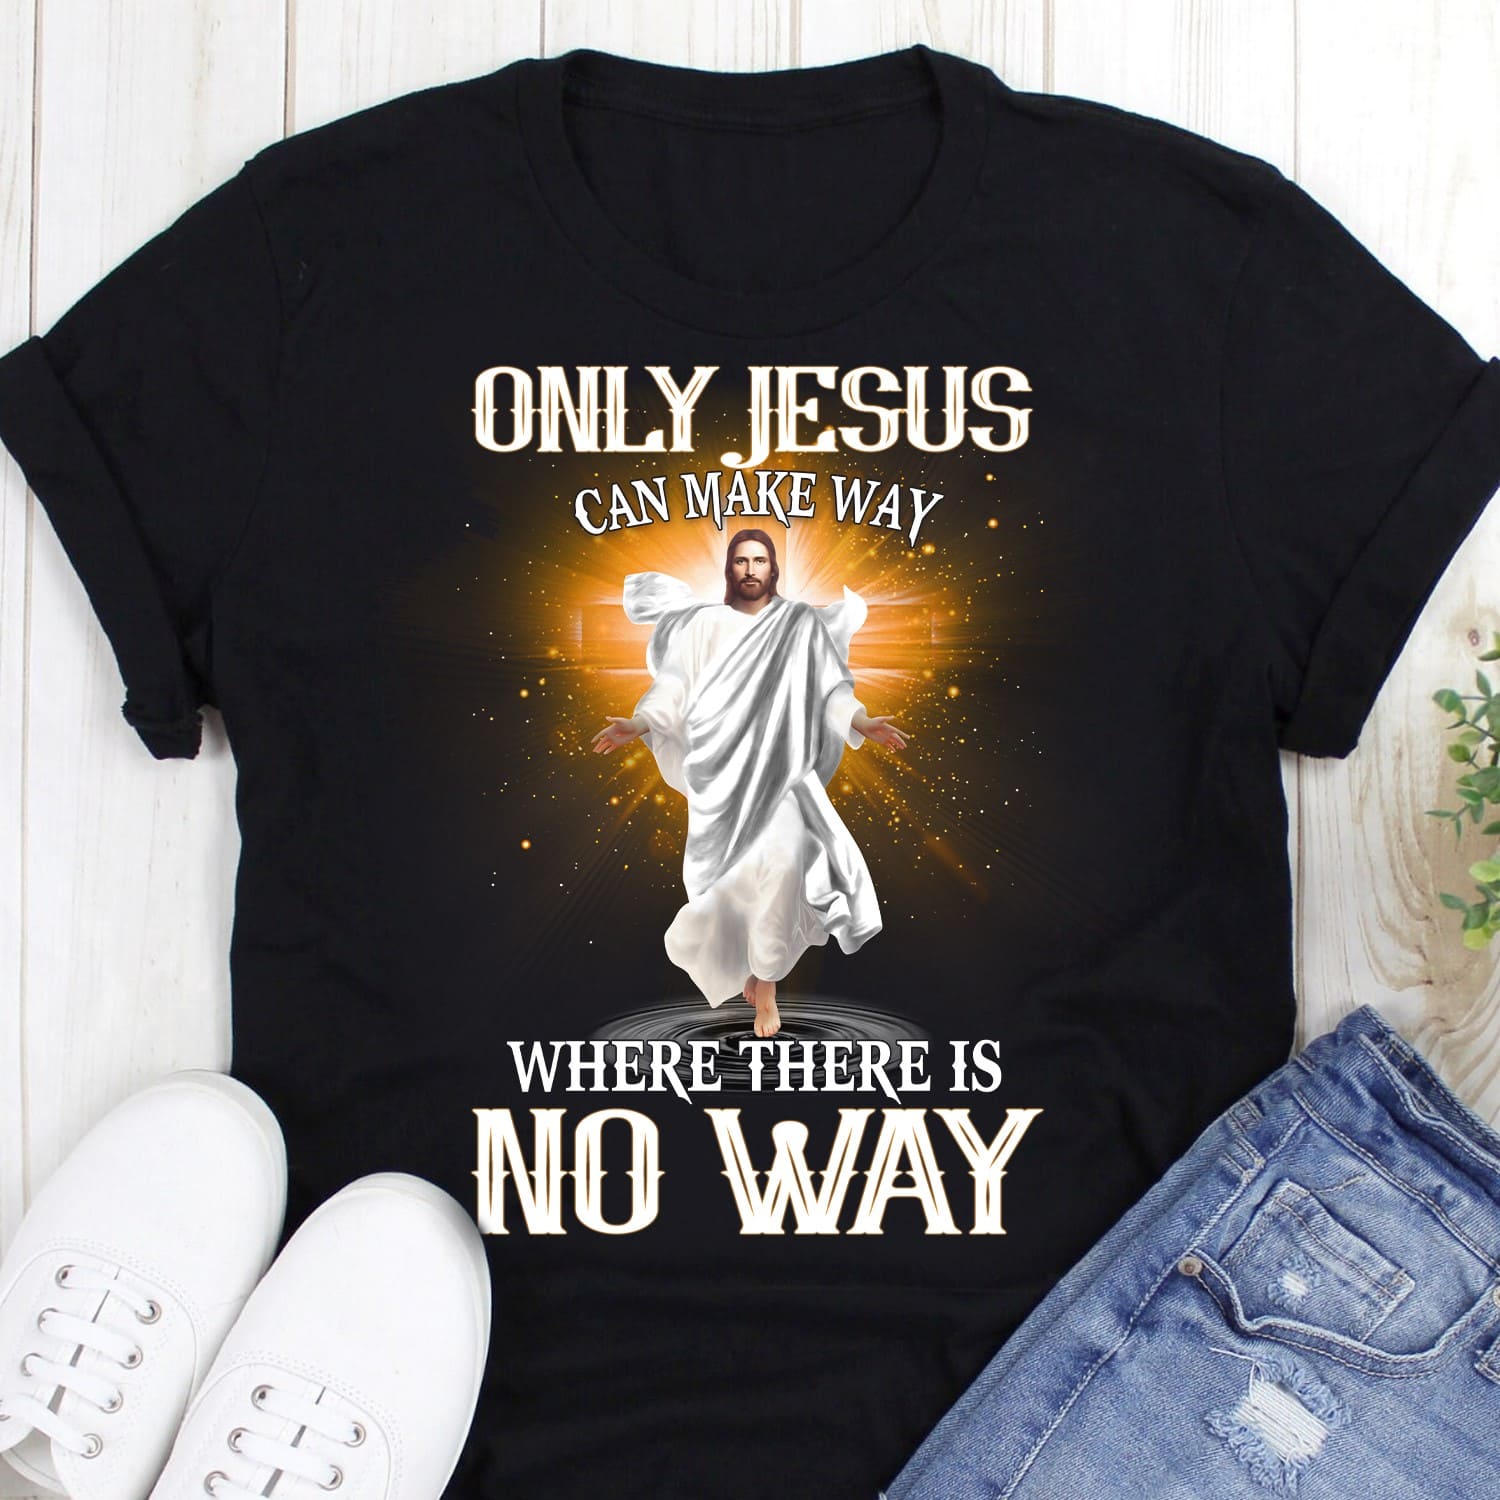 Jesus Christ - Only Jesus can make way where there is no way